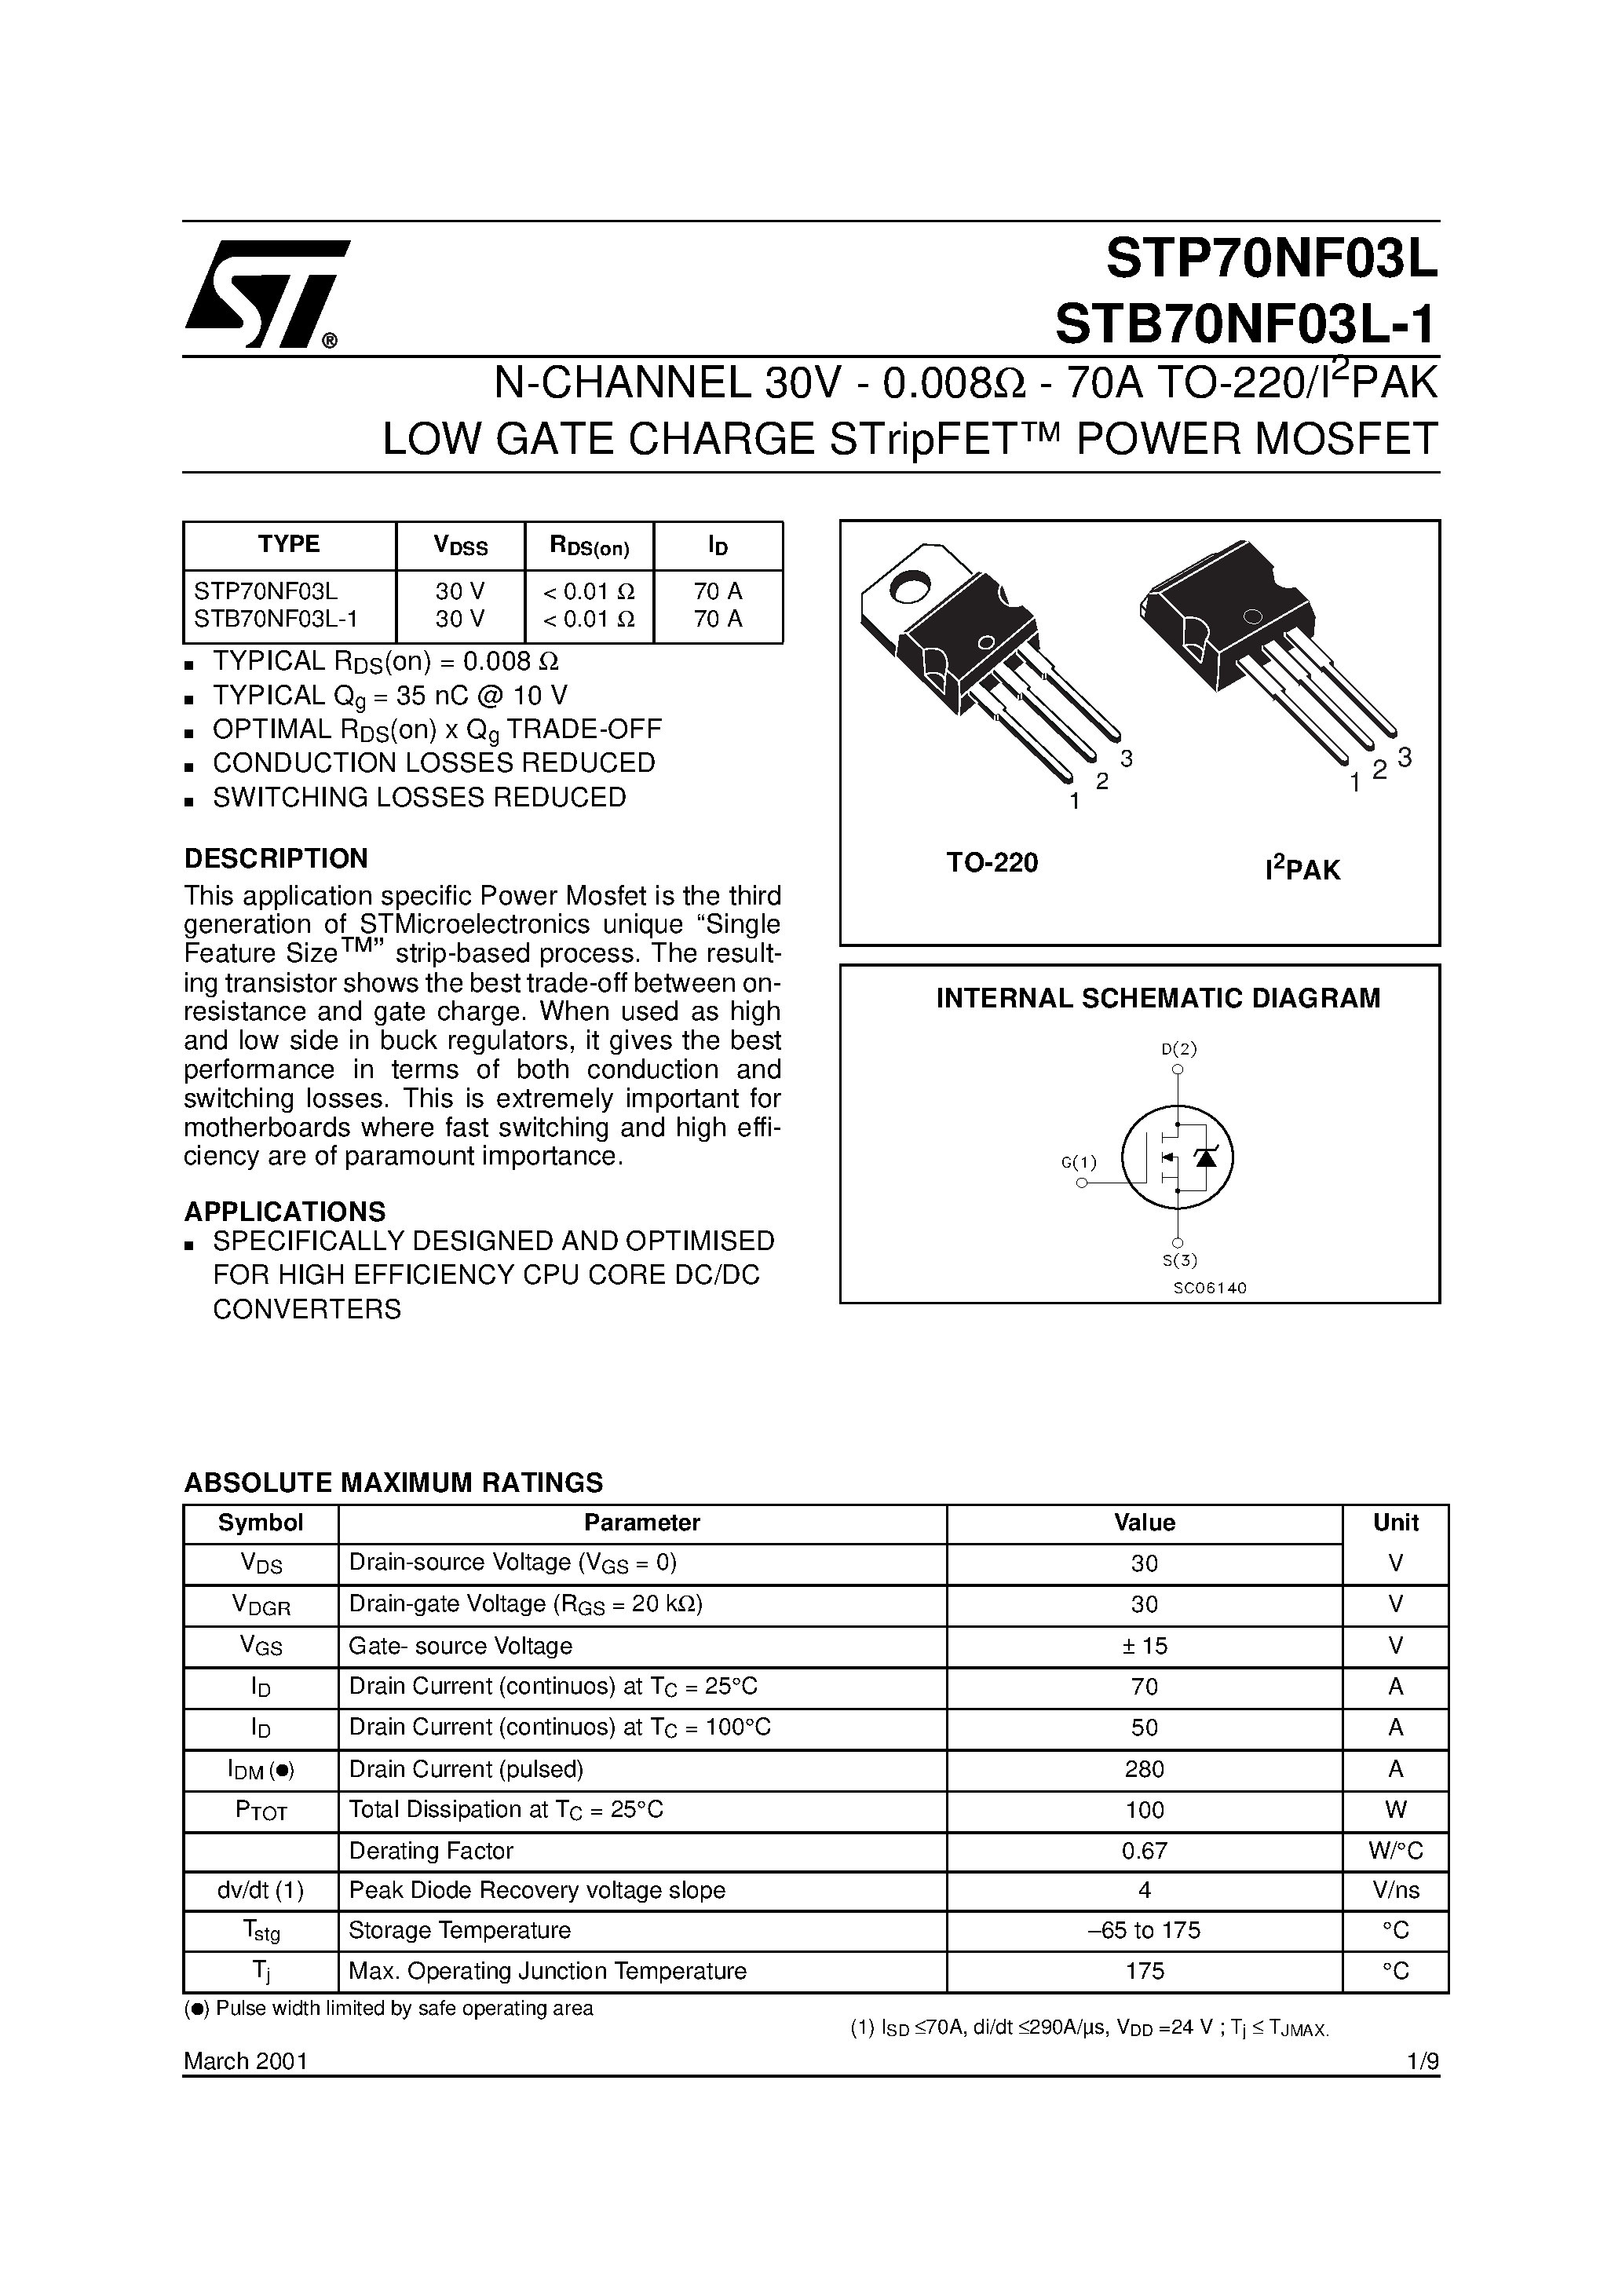 Даташит STB70NF03L-N-CHANNEL MOSFET страница 1